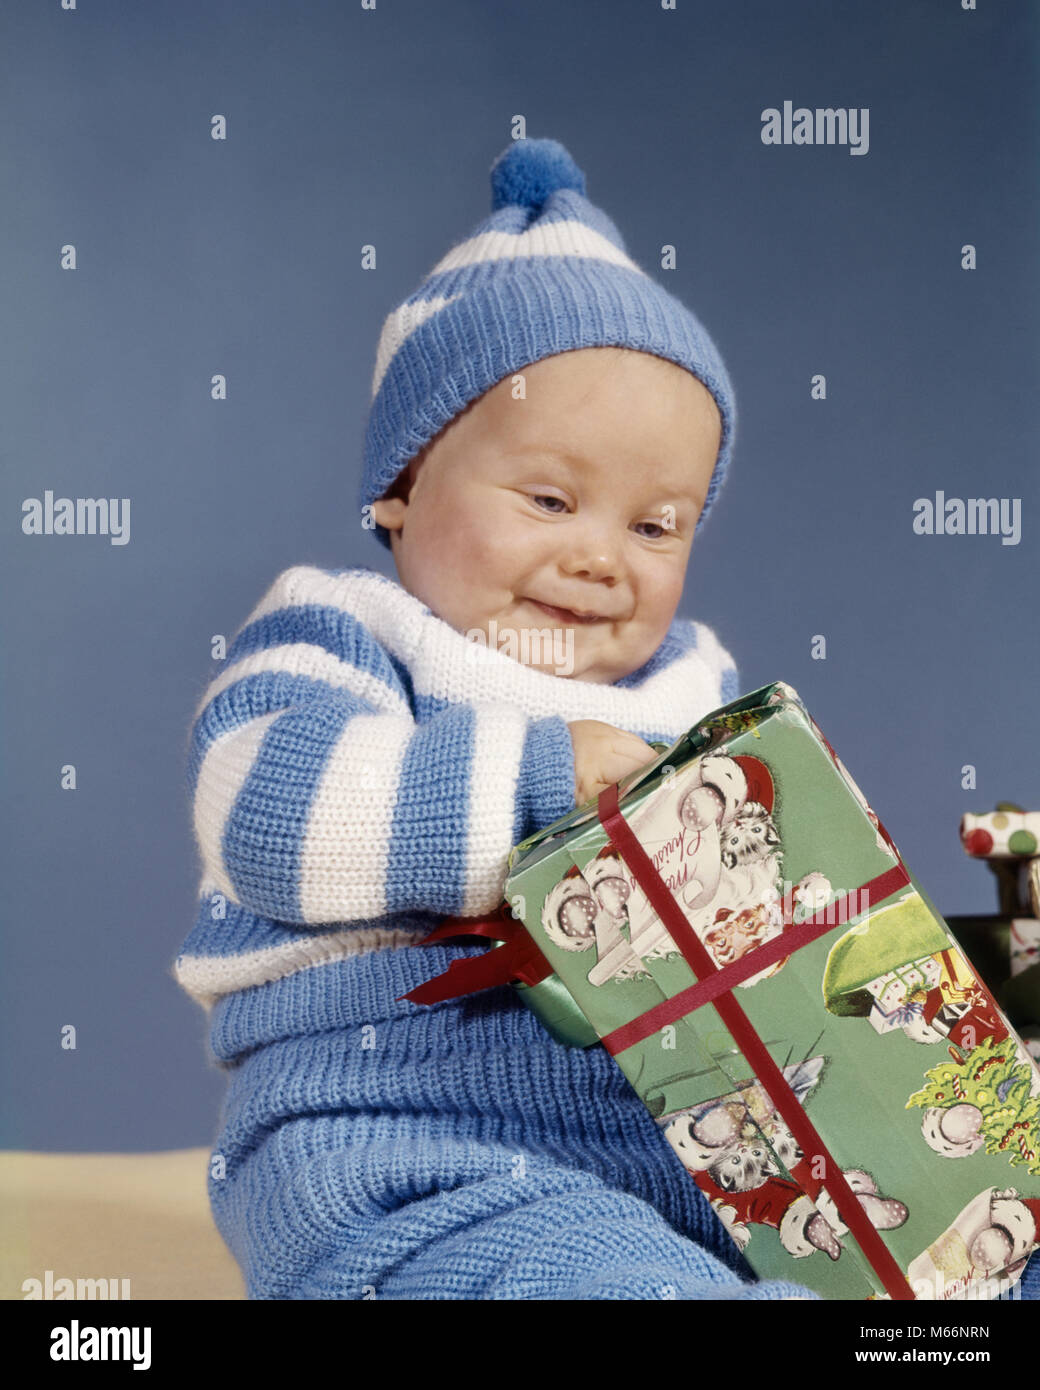 1960s BABY BOY BLUE WHITE KNIT OUTFIT EXCITED OPENING CHRISTMAS PRESENT - kx4916 HAR001 HARS NOSTALGIA KNIT HAPPINESS HEAD AND SHOULDERS EXCITEMENT SMILES DECEMBER JOYFUL DECEMBER 25 BABY BOY 1-6 MONTHS 6-12 MONTHS JUVENILES MALES CAUCASIAN ETHNICITY OLD FASHIONED Stock Photo